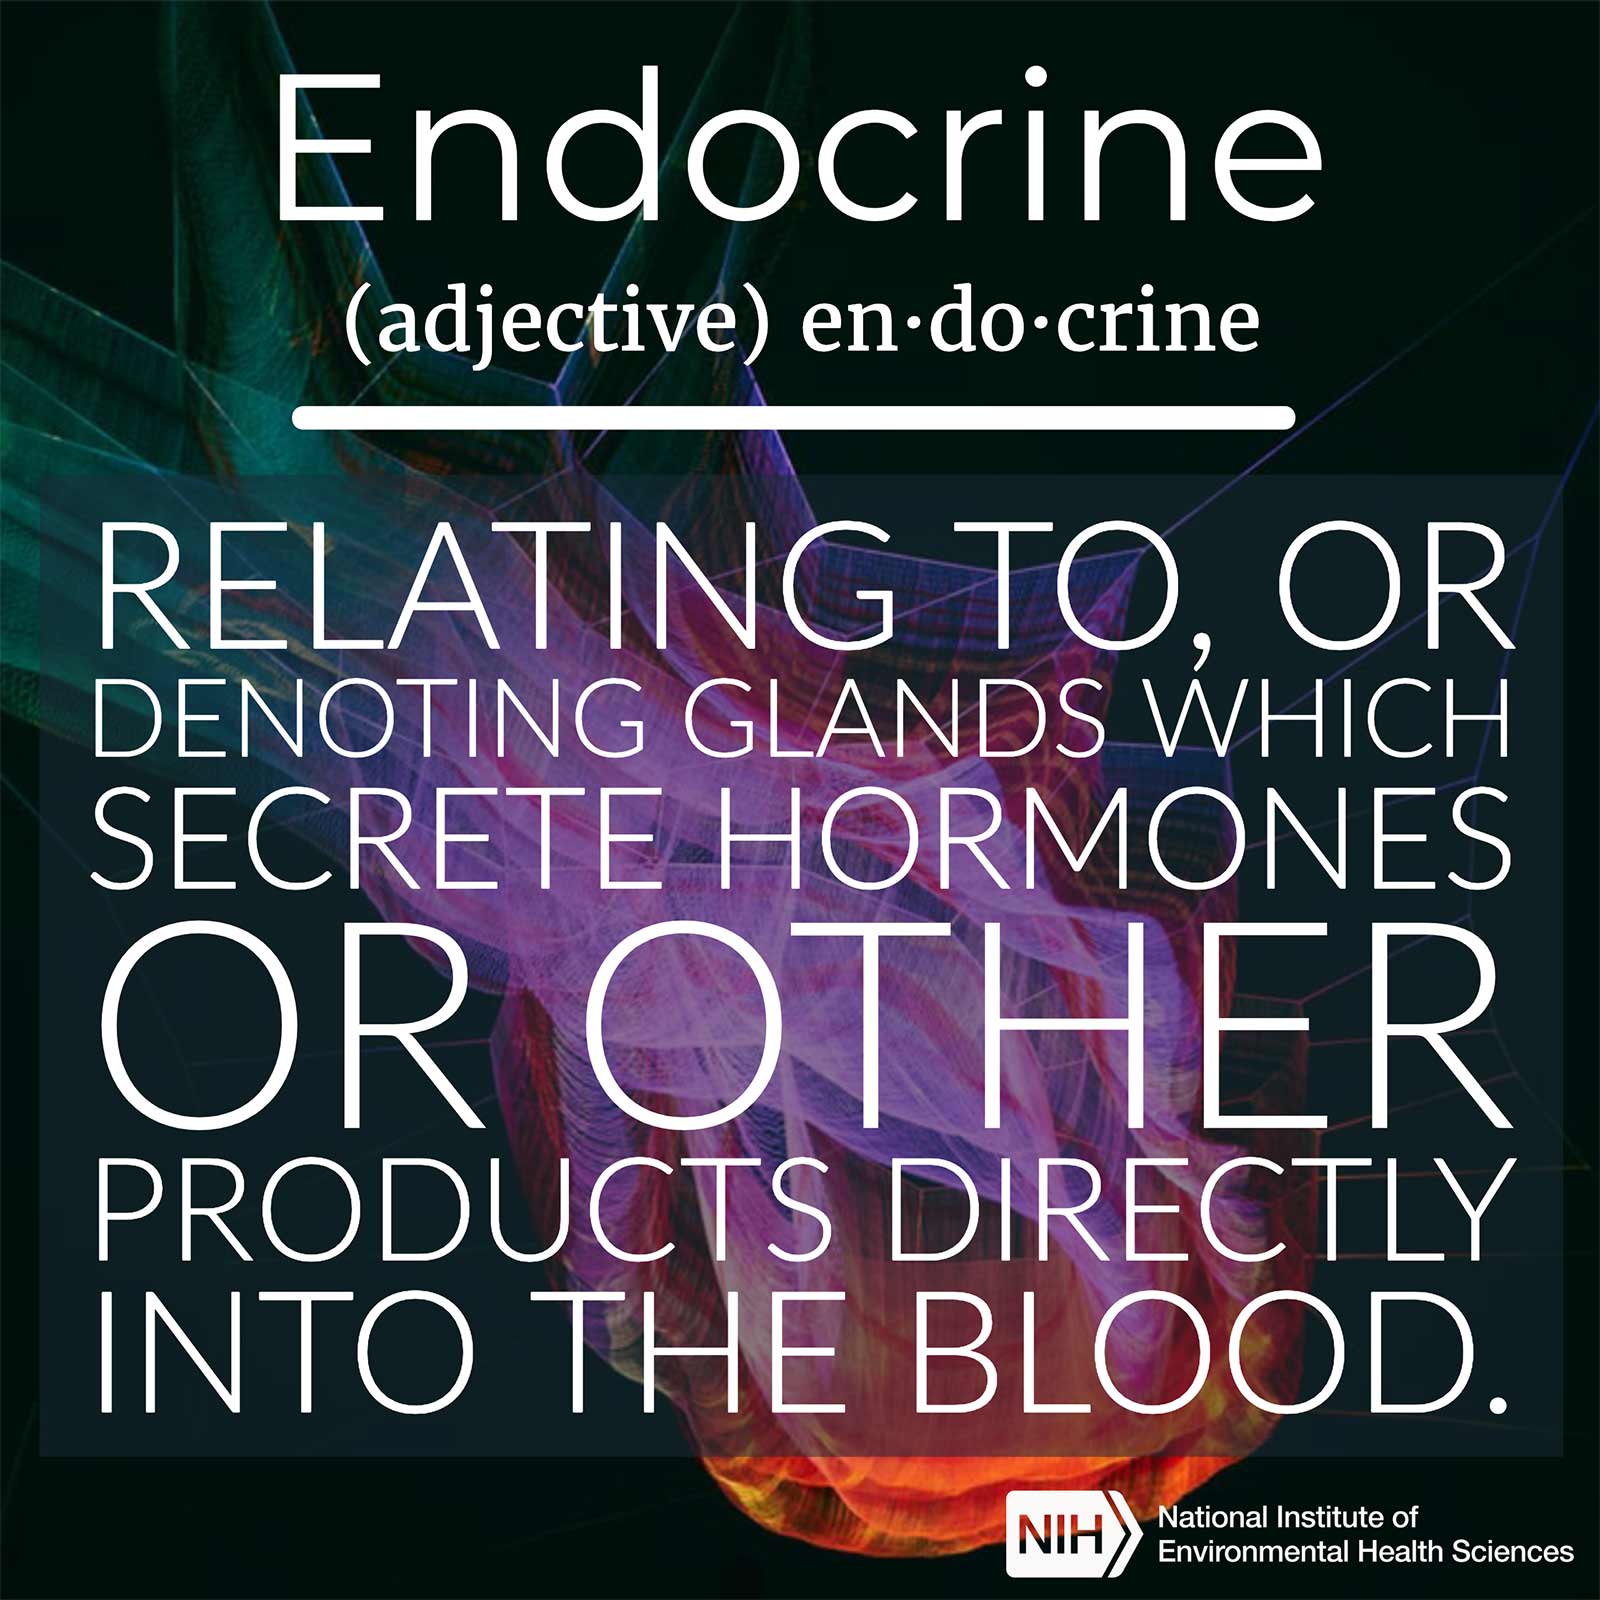 Endocrine (adjective) defined as &#39;Relating to, or denoting glands which secrete hormones or other products directly into the blood&#39;